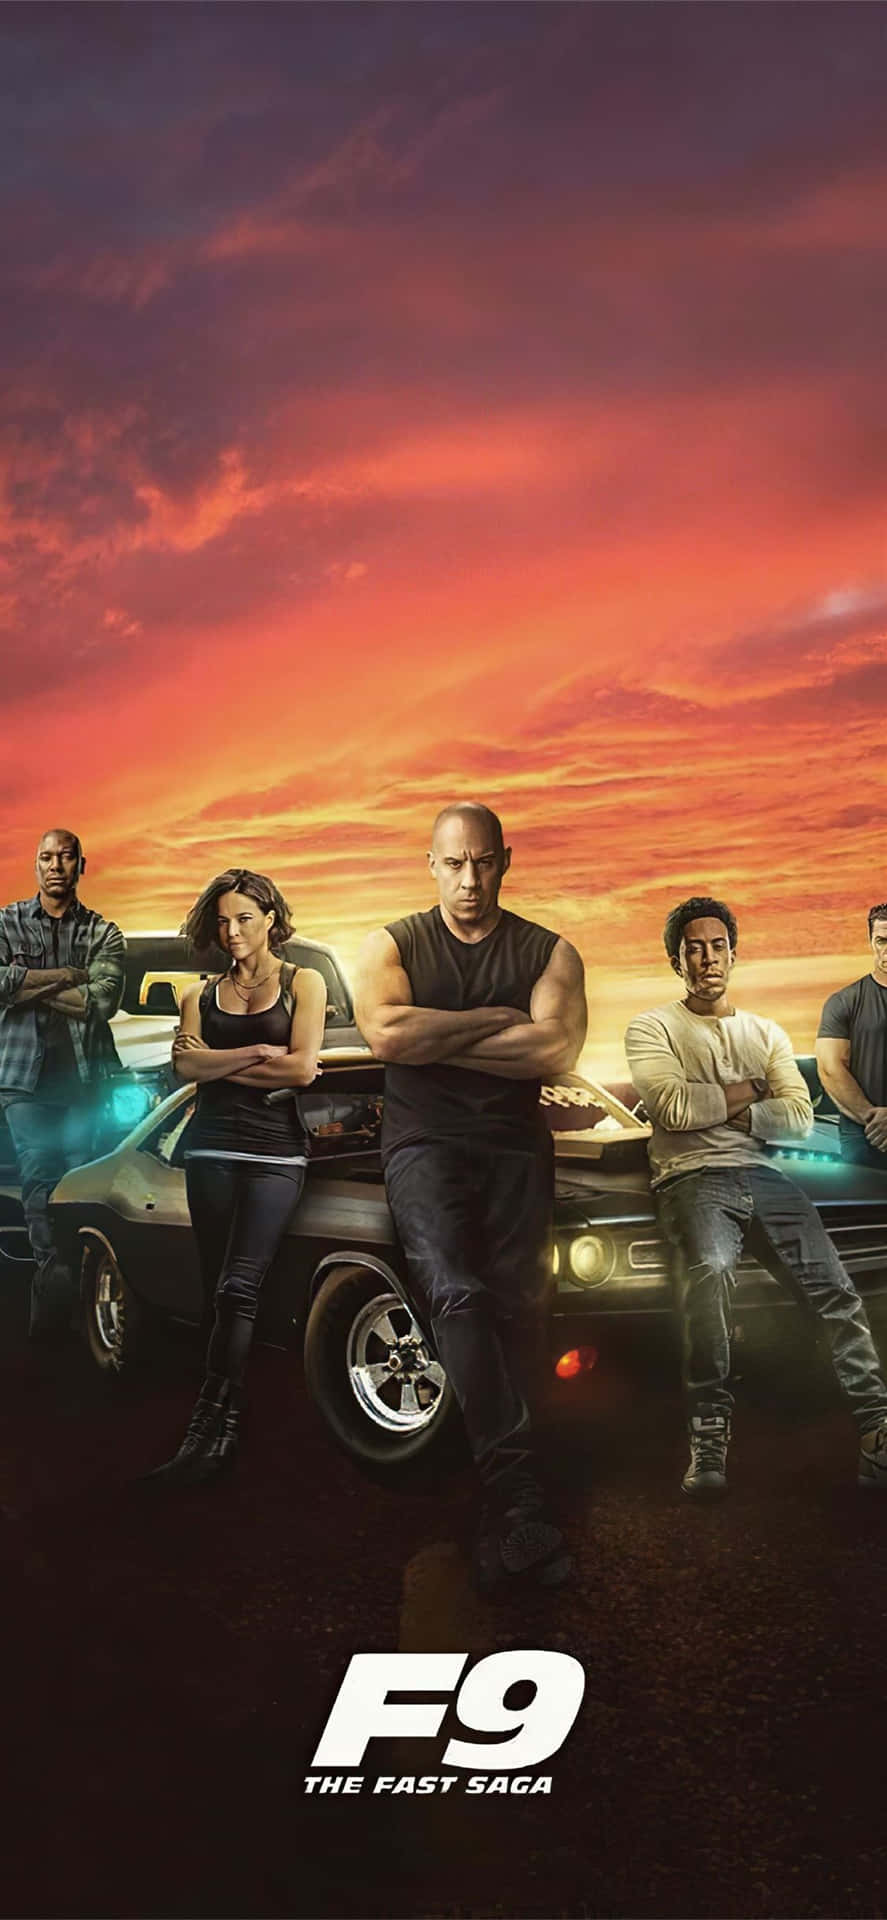 Vindiesel Spielt Dominic Toretto In Fast And Furious 9. Wallpaper